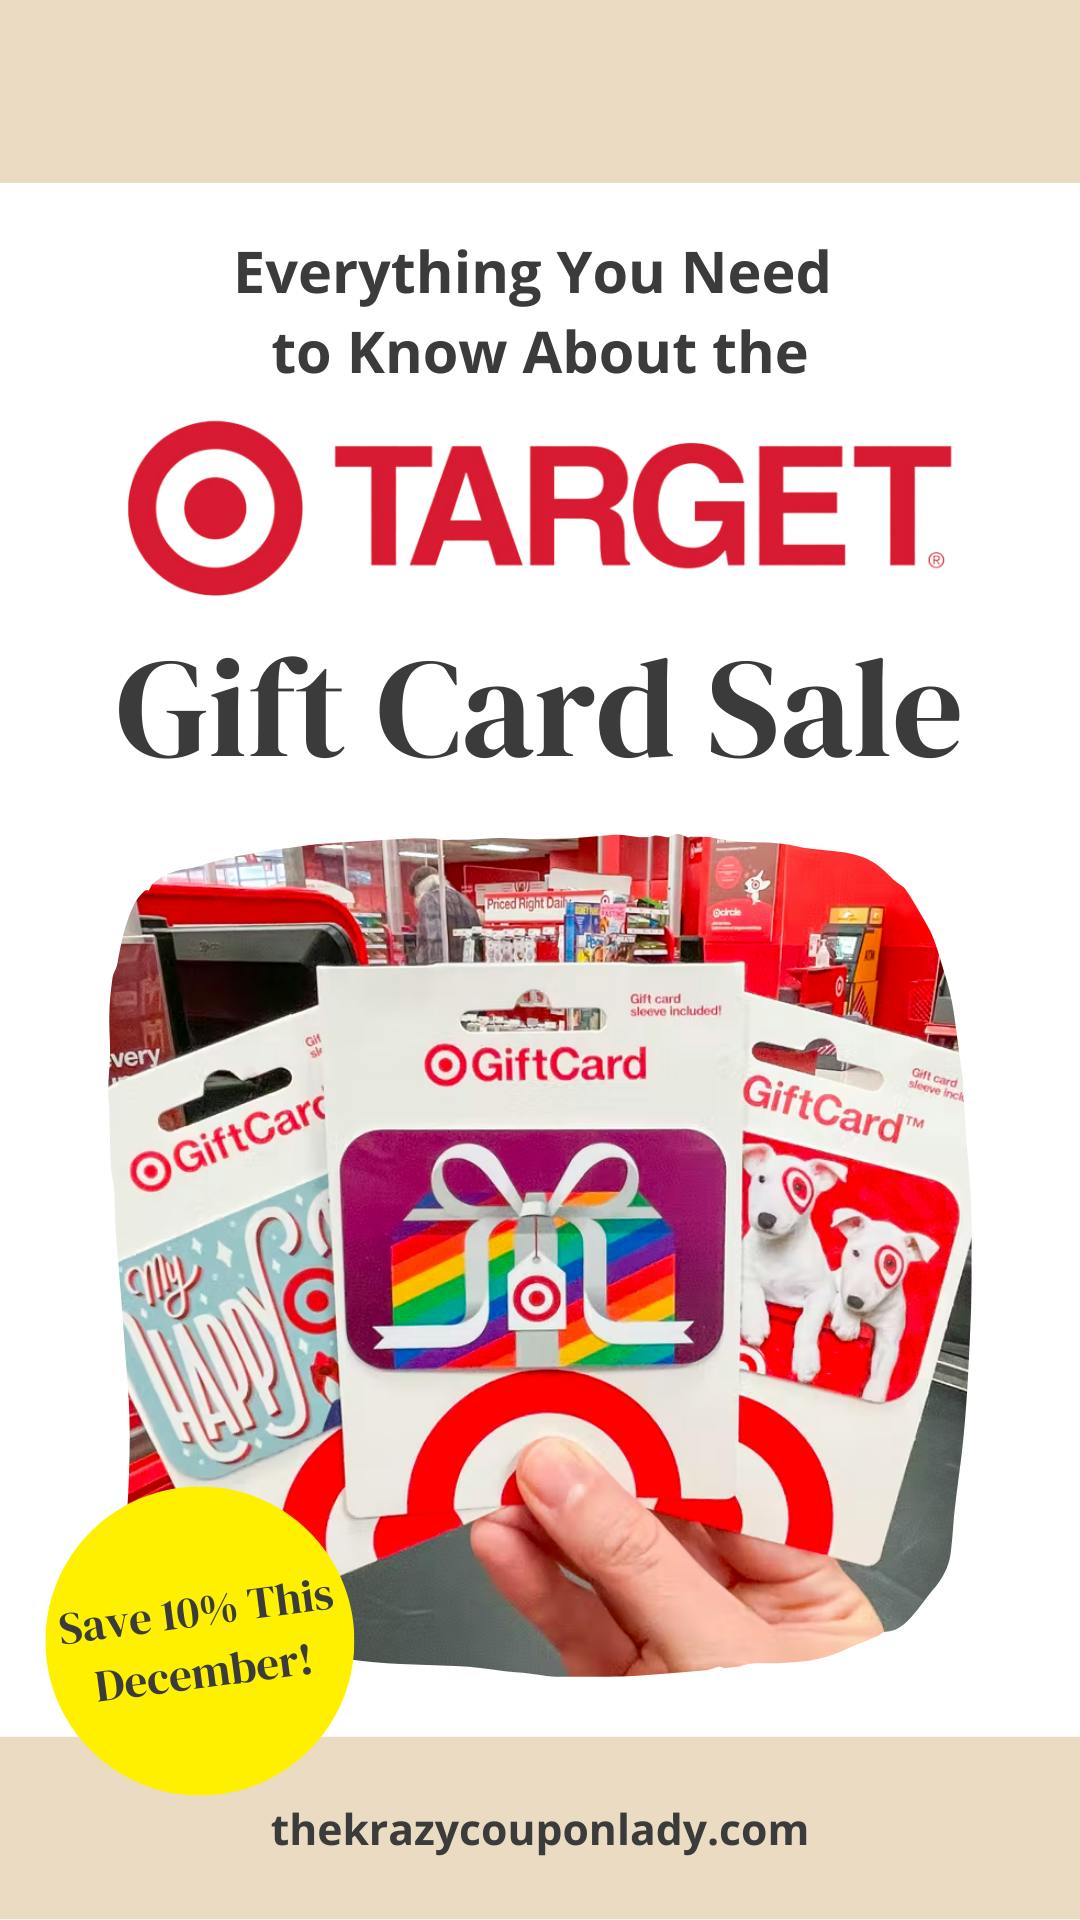 Target Gift Card Sale — Save 10% When You Shop The First Weekend of December